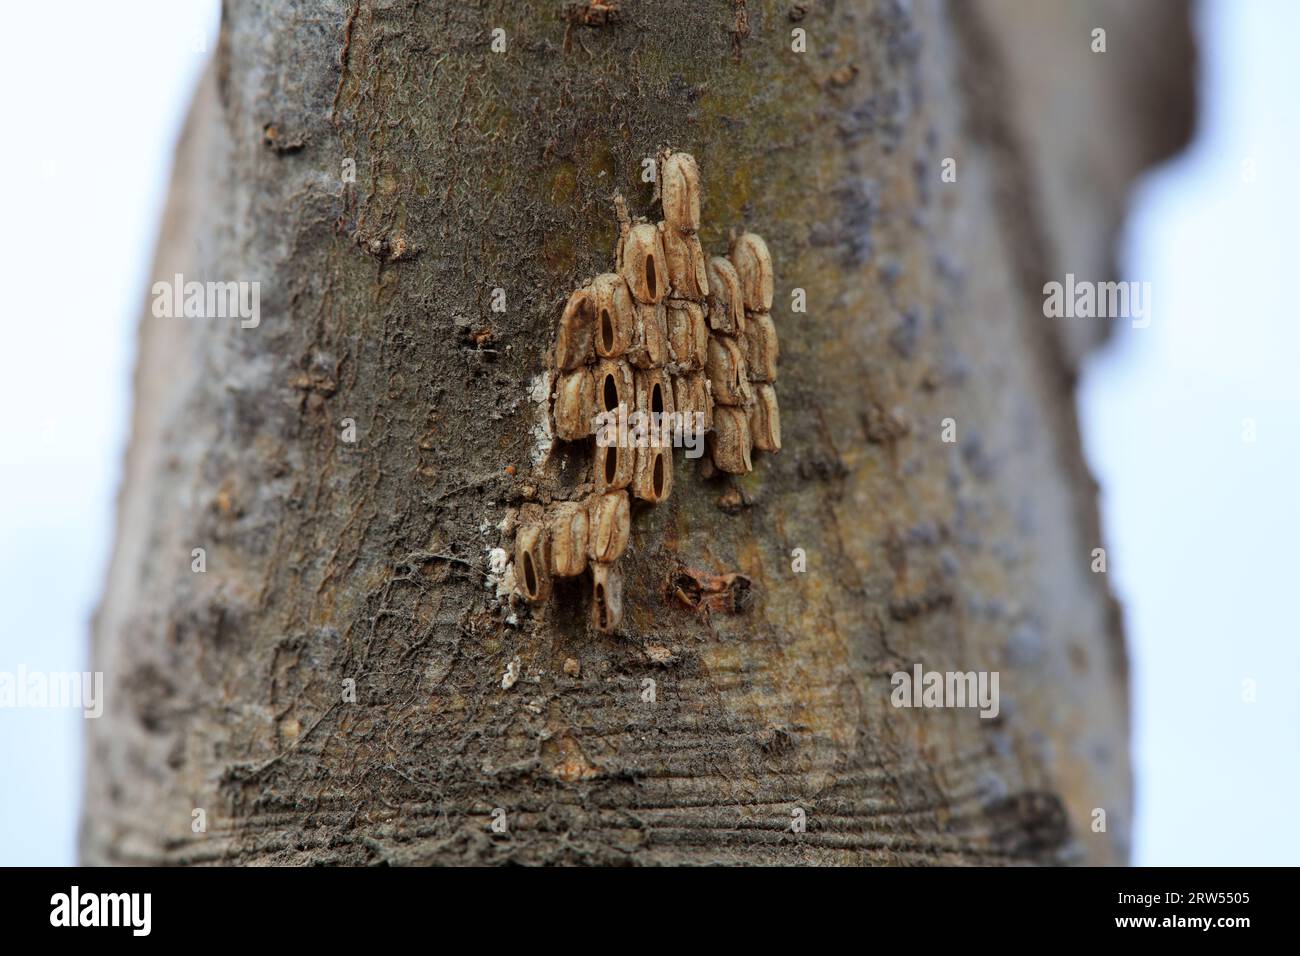 The egg shell of Empoasca maculata is on the bark, North China Stock Photo